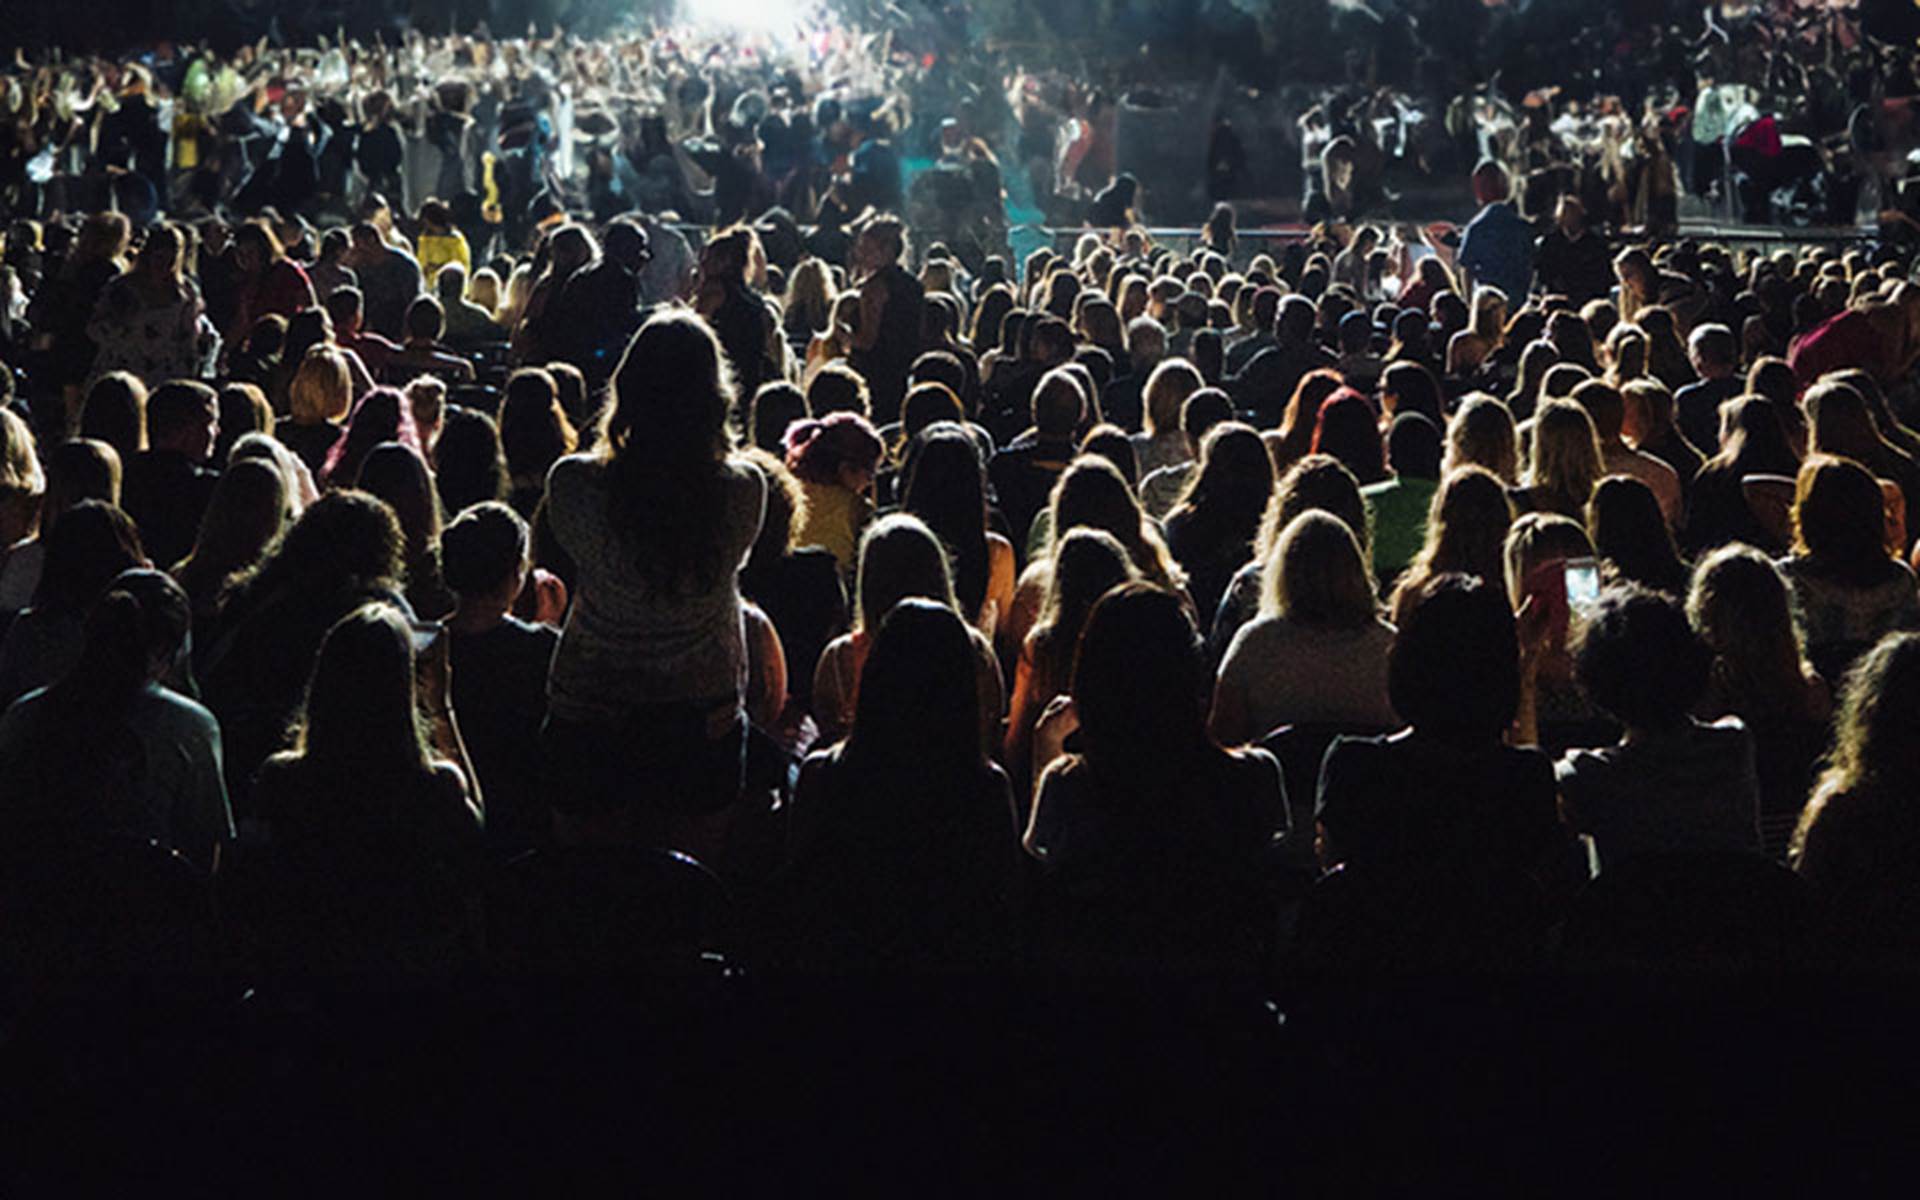 Crowded concert venue